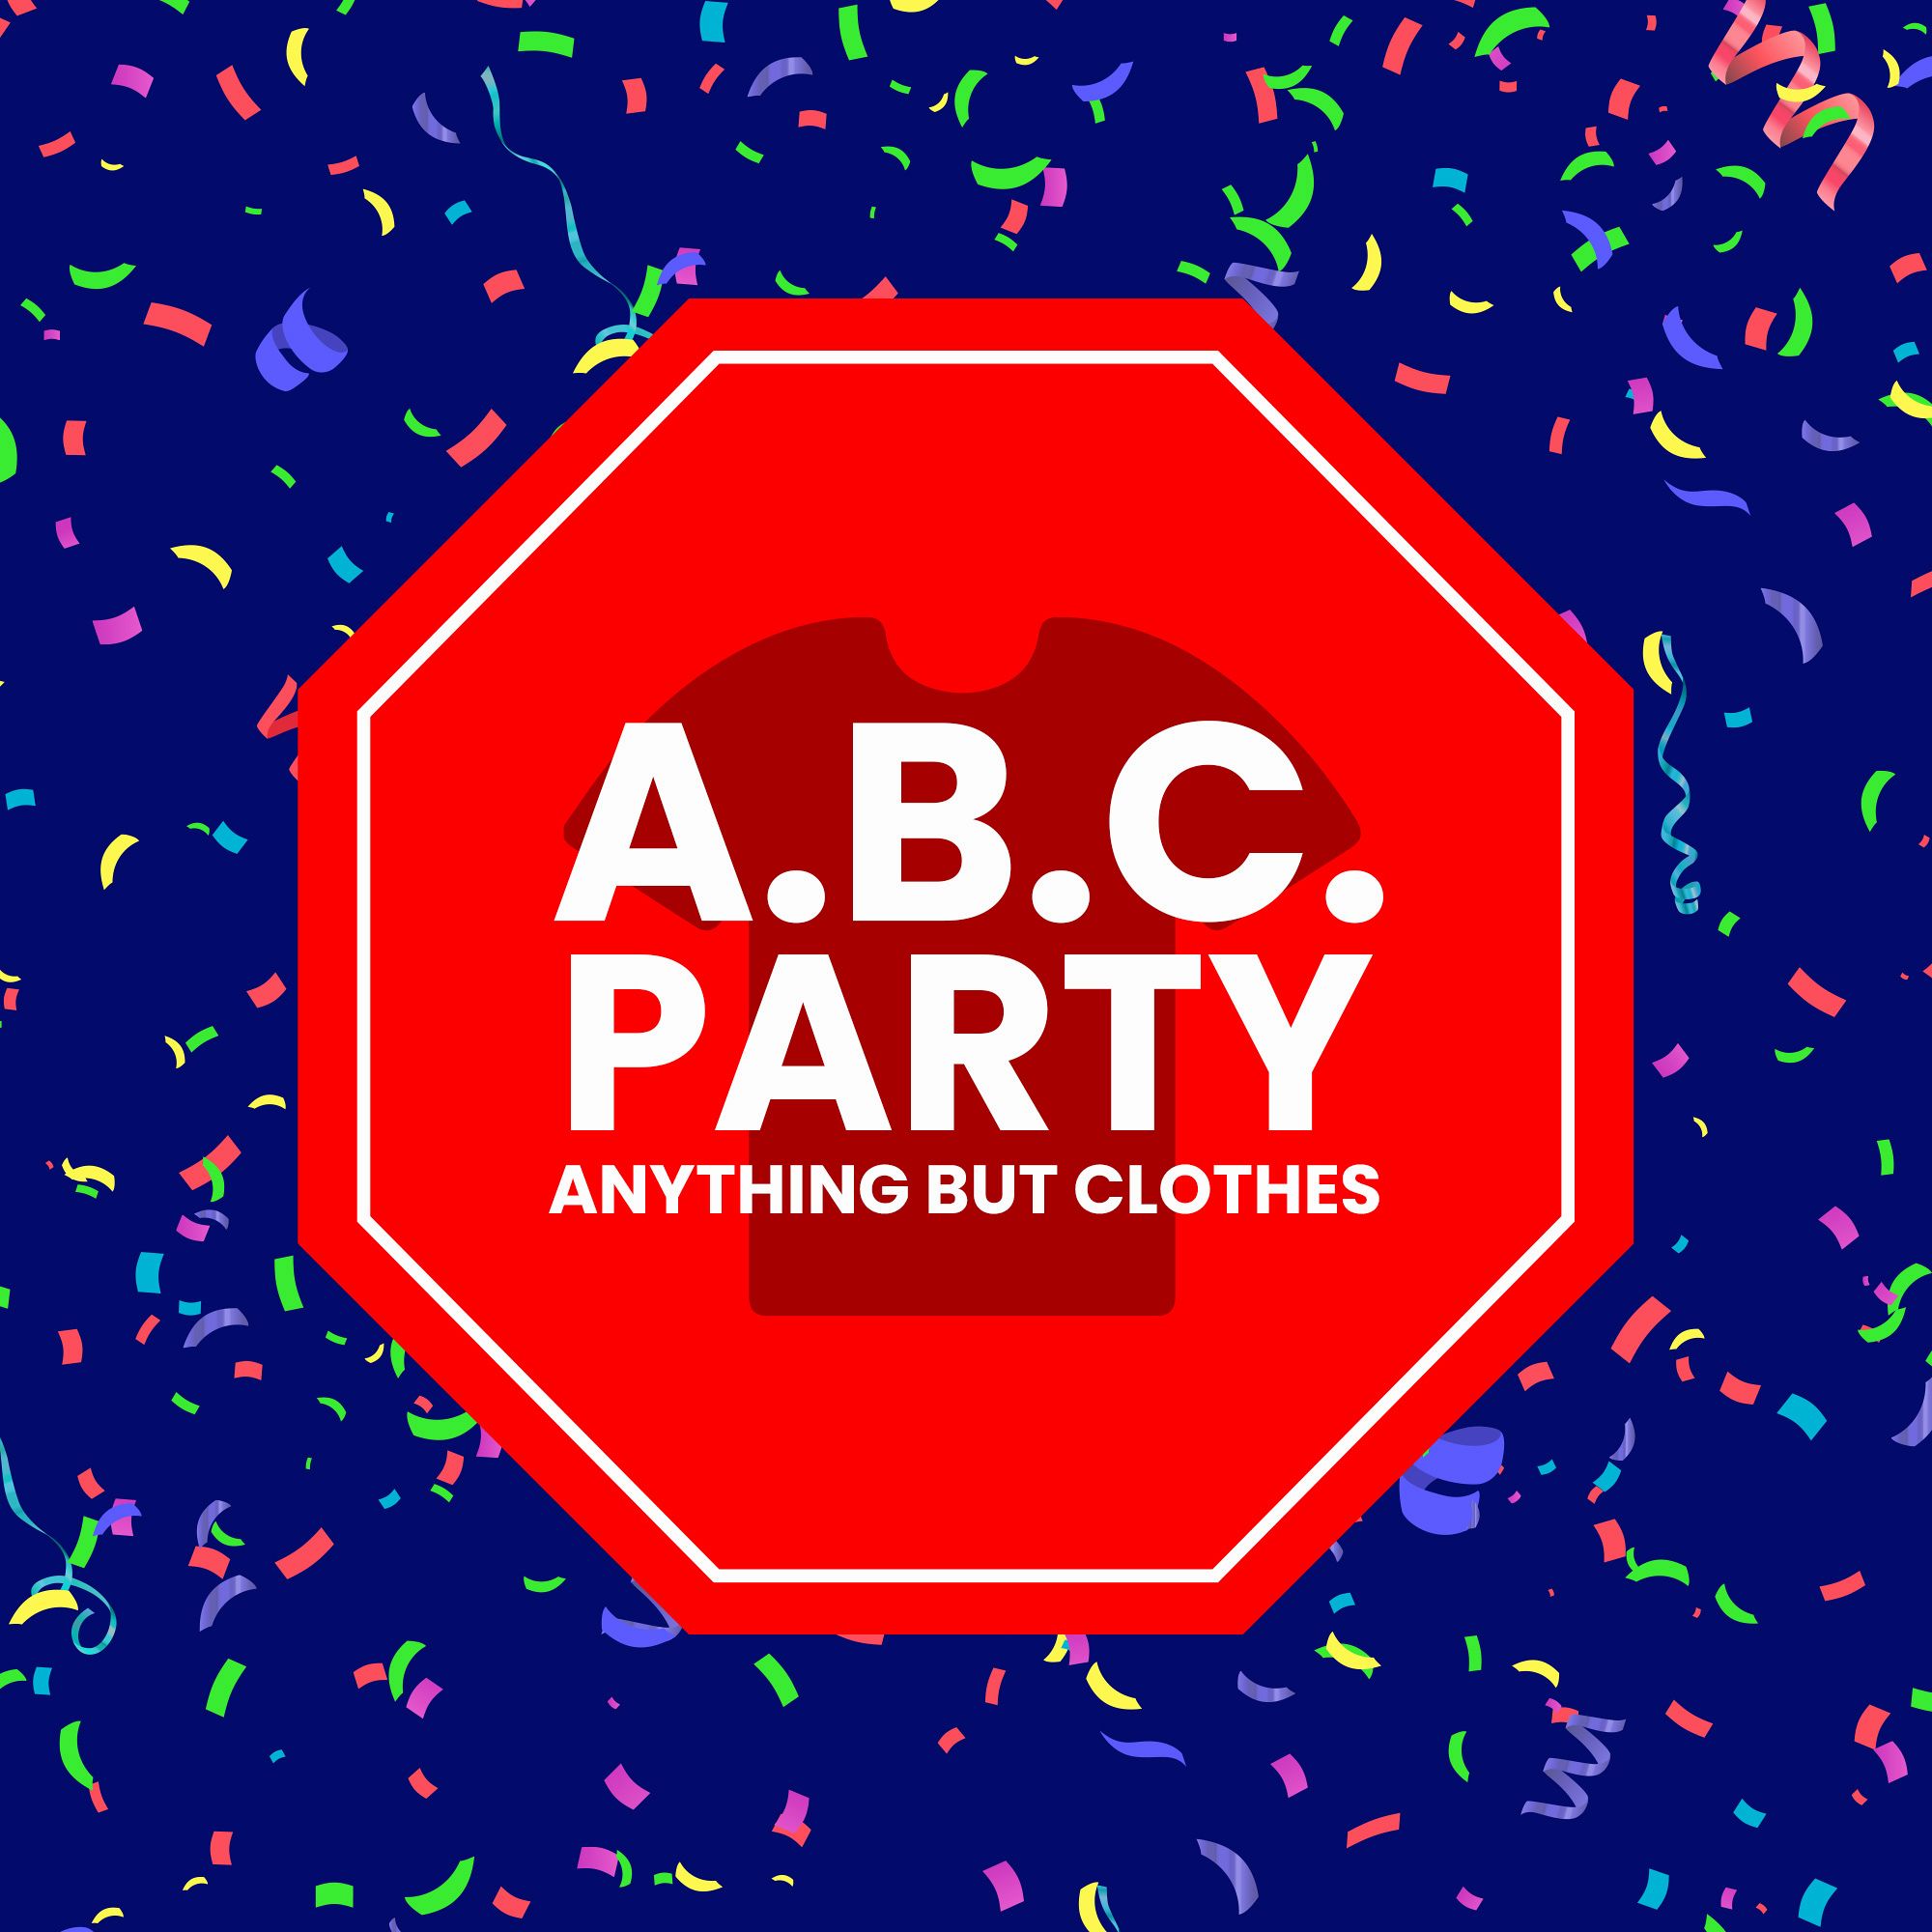 A.B.C Party (Anything But Clothes)